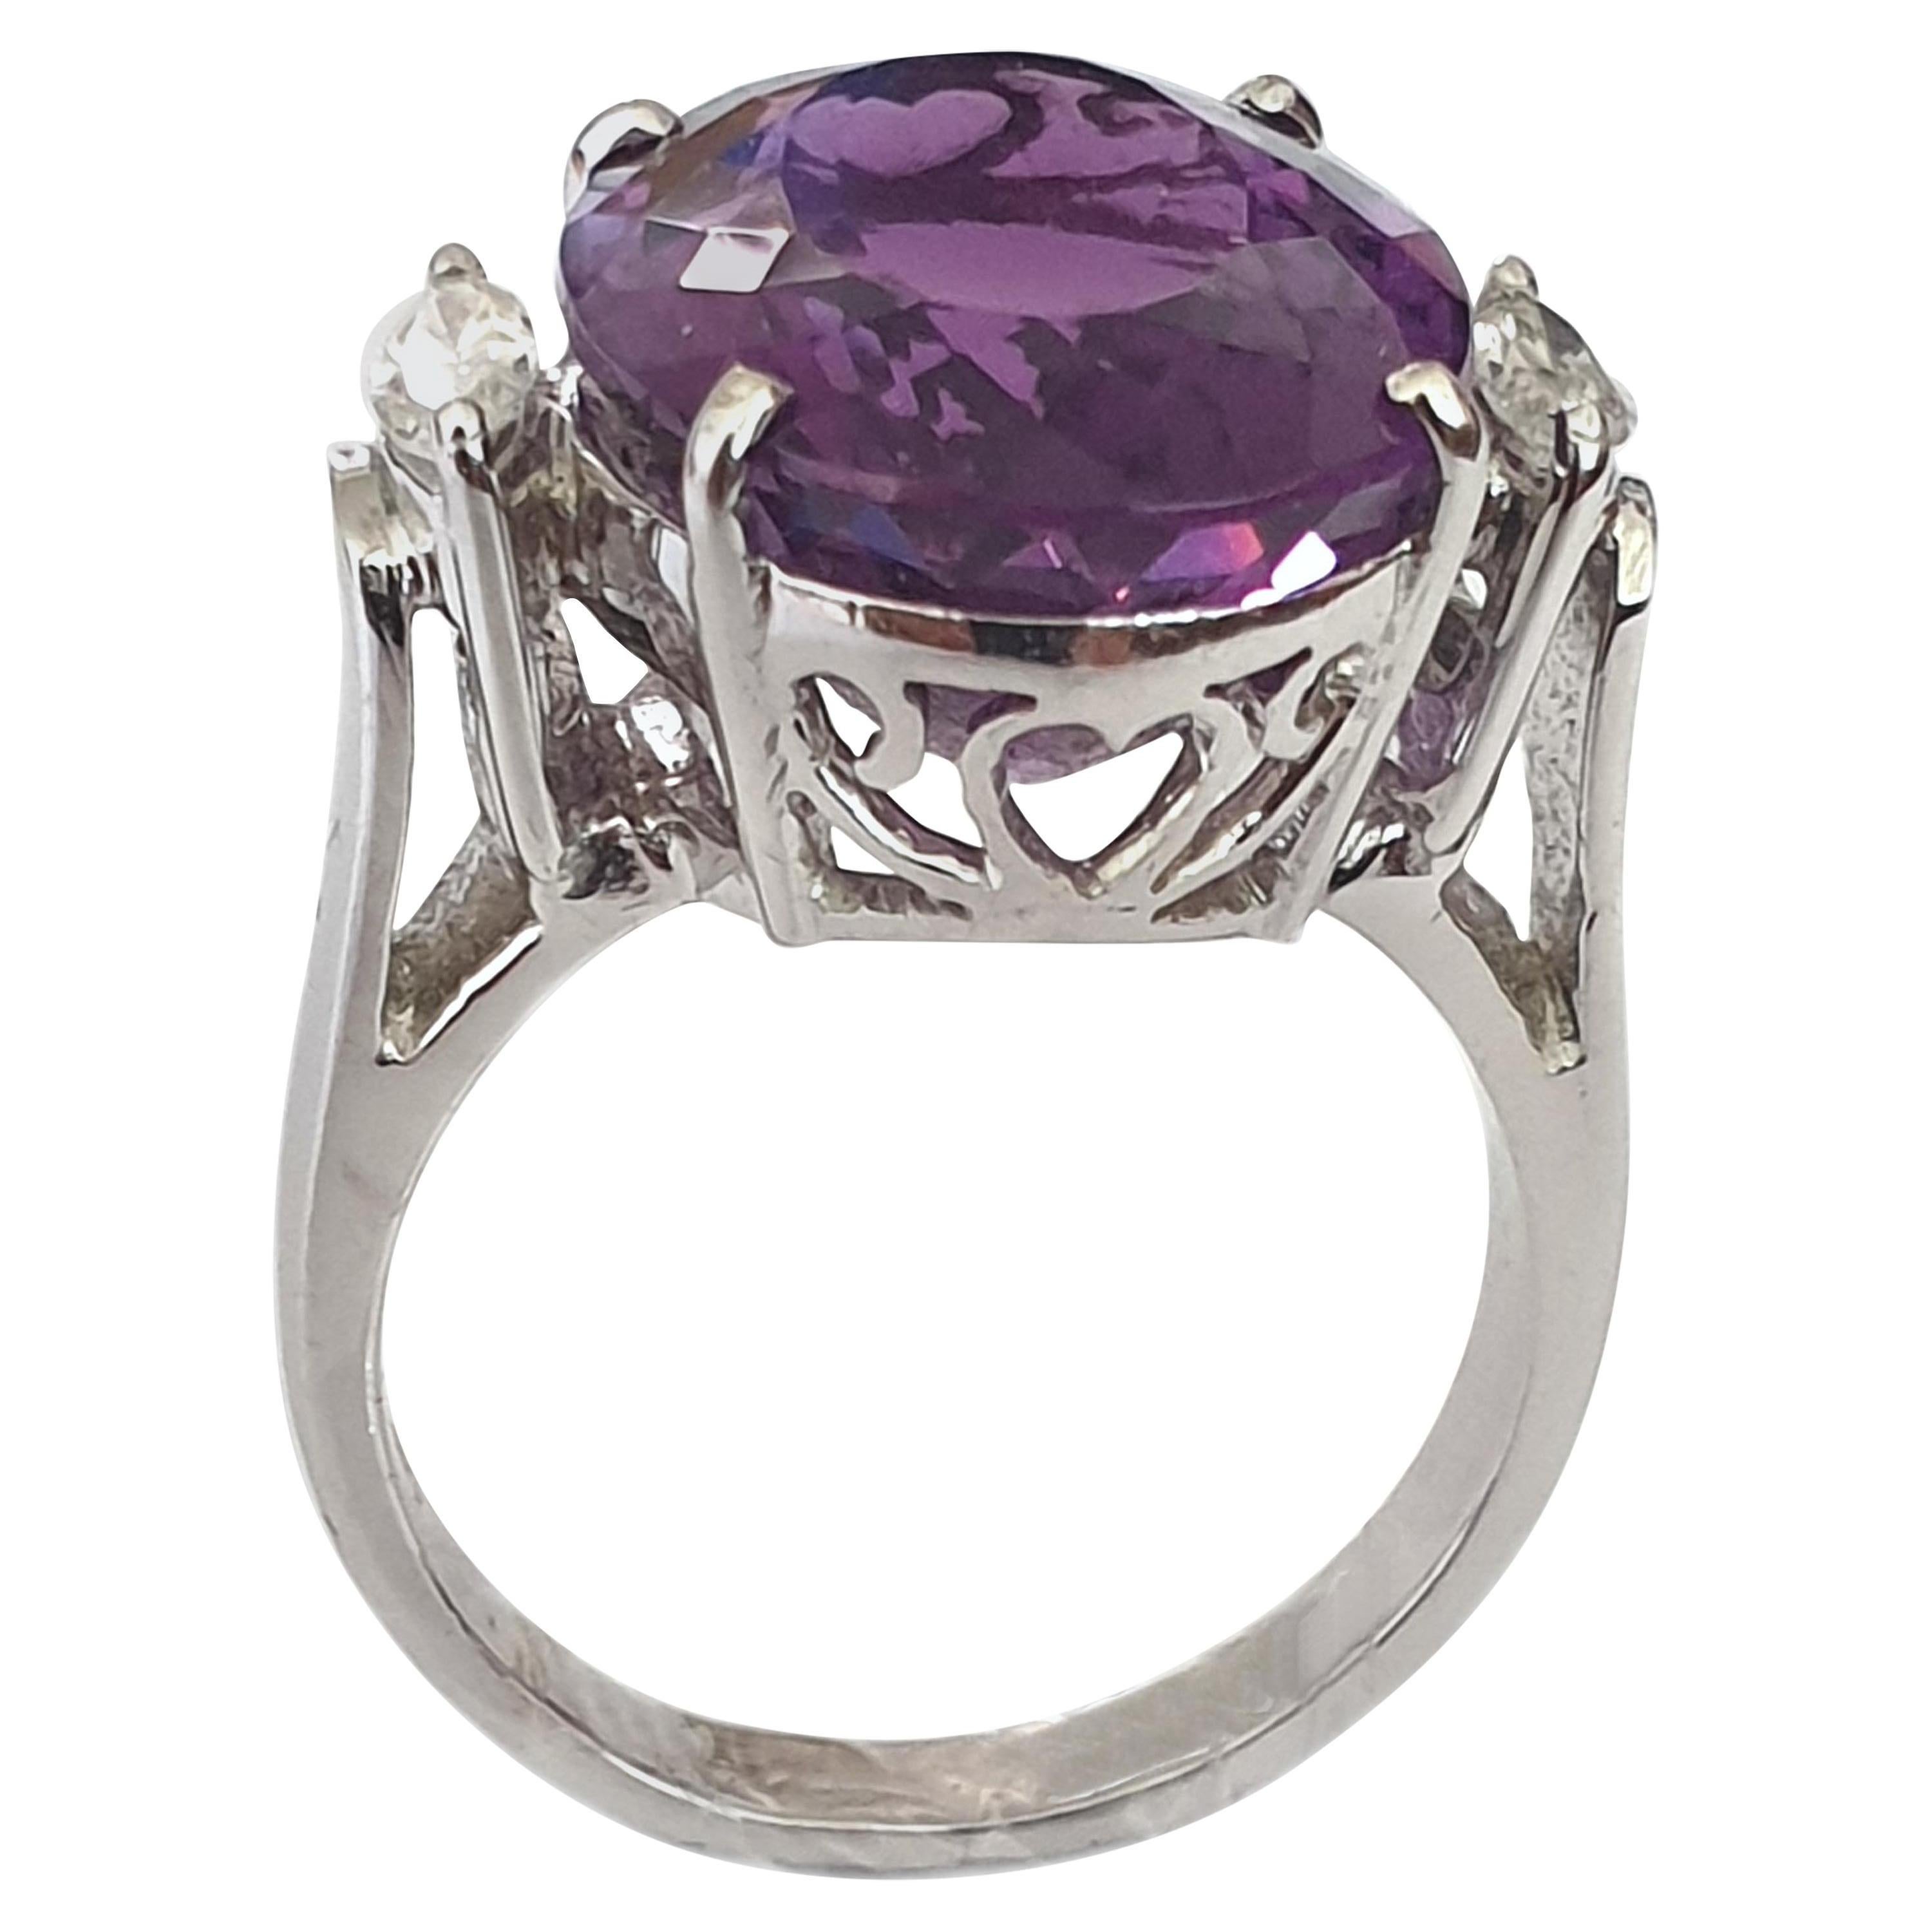 Platinum-Plated Sterling Silver Amethyst Zircon Cocktail Ring Size 9 Ct 12.4 